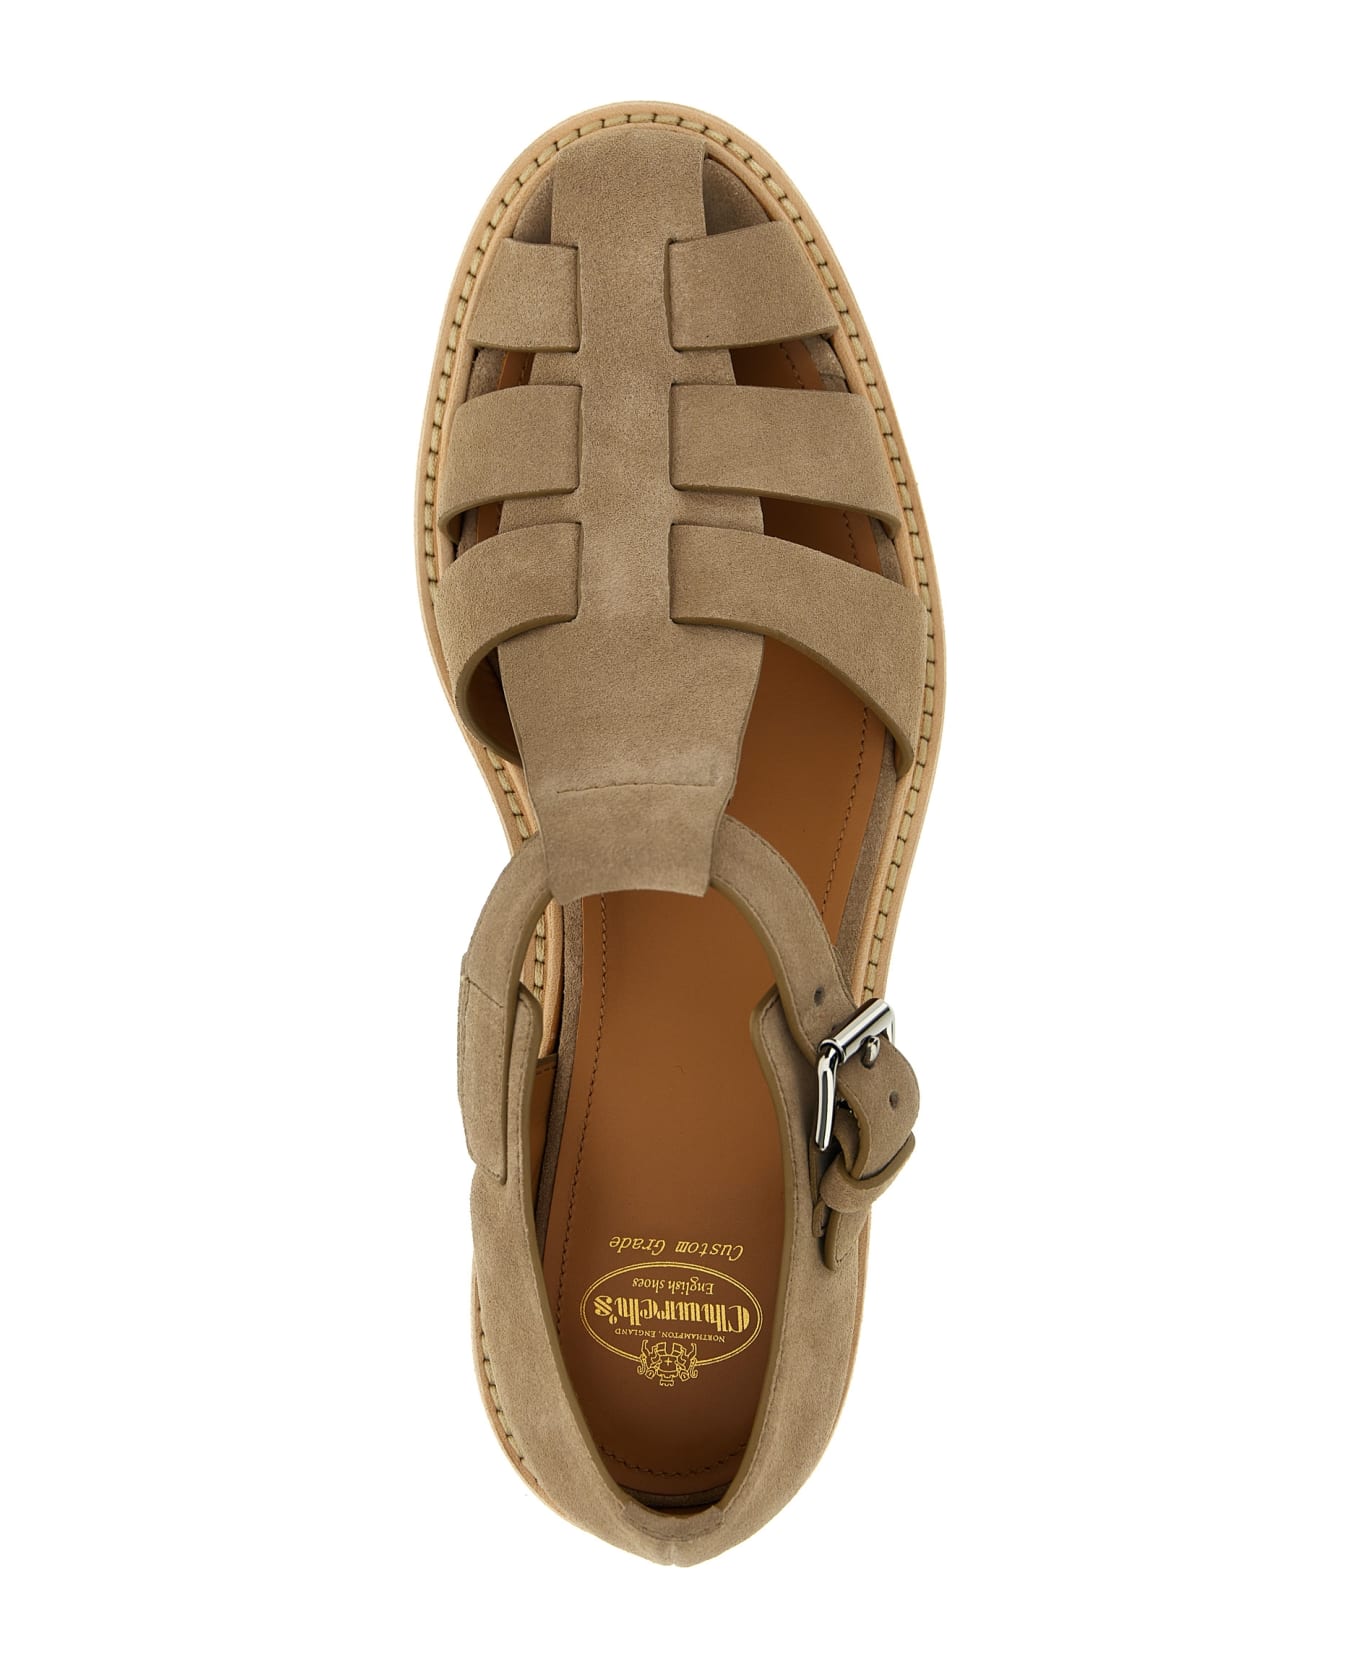 Church's 'hove' Sandals - Beige